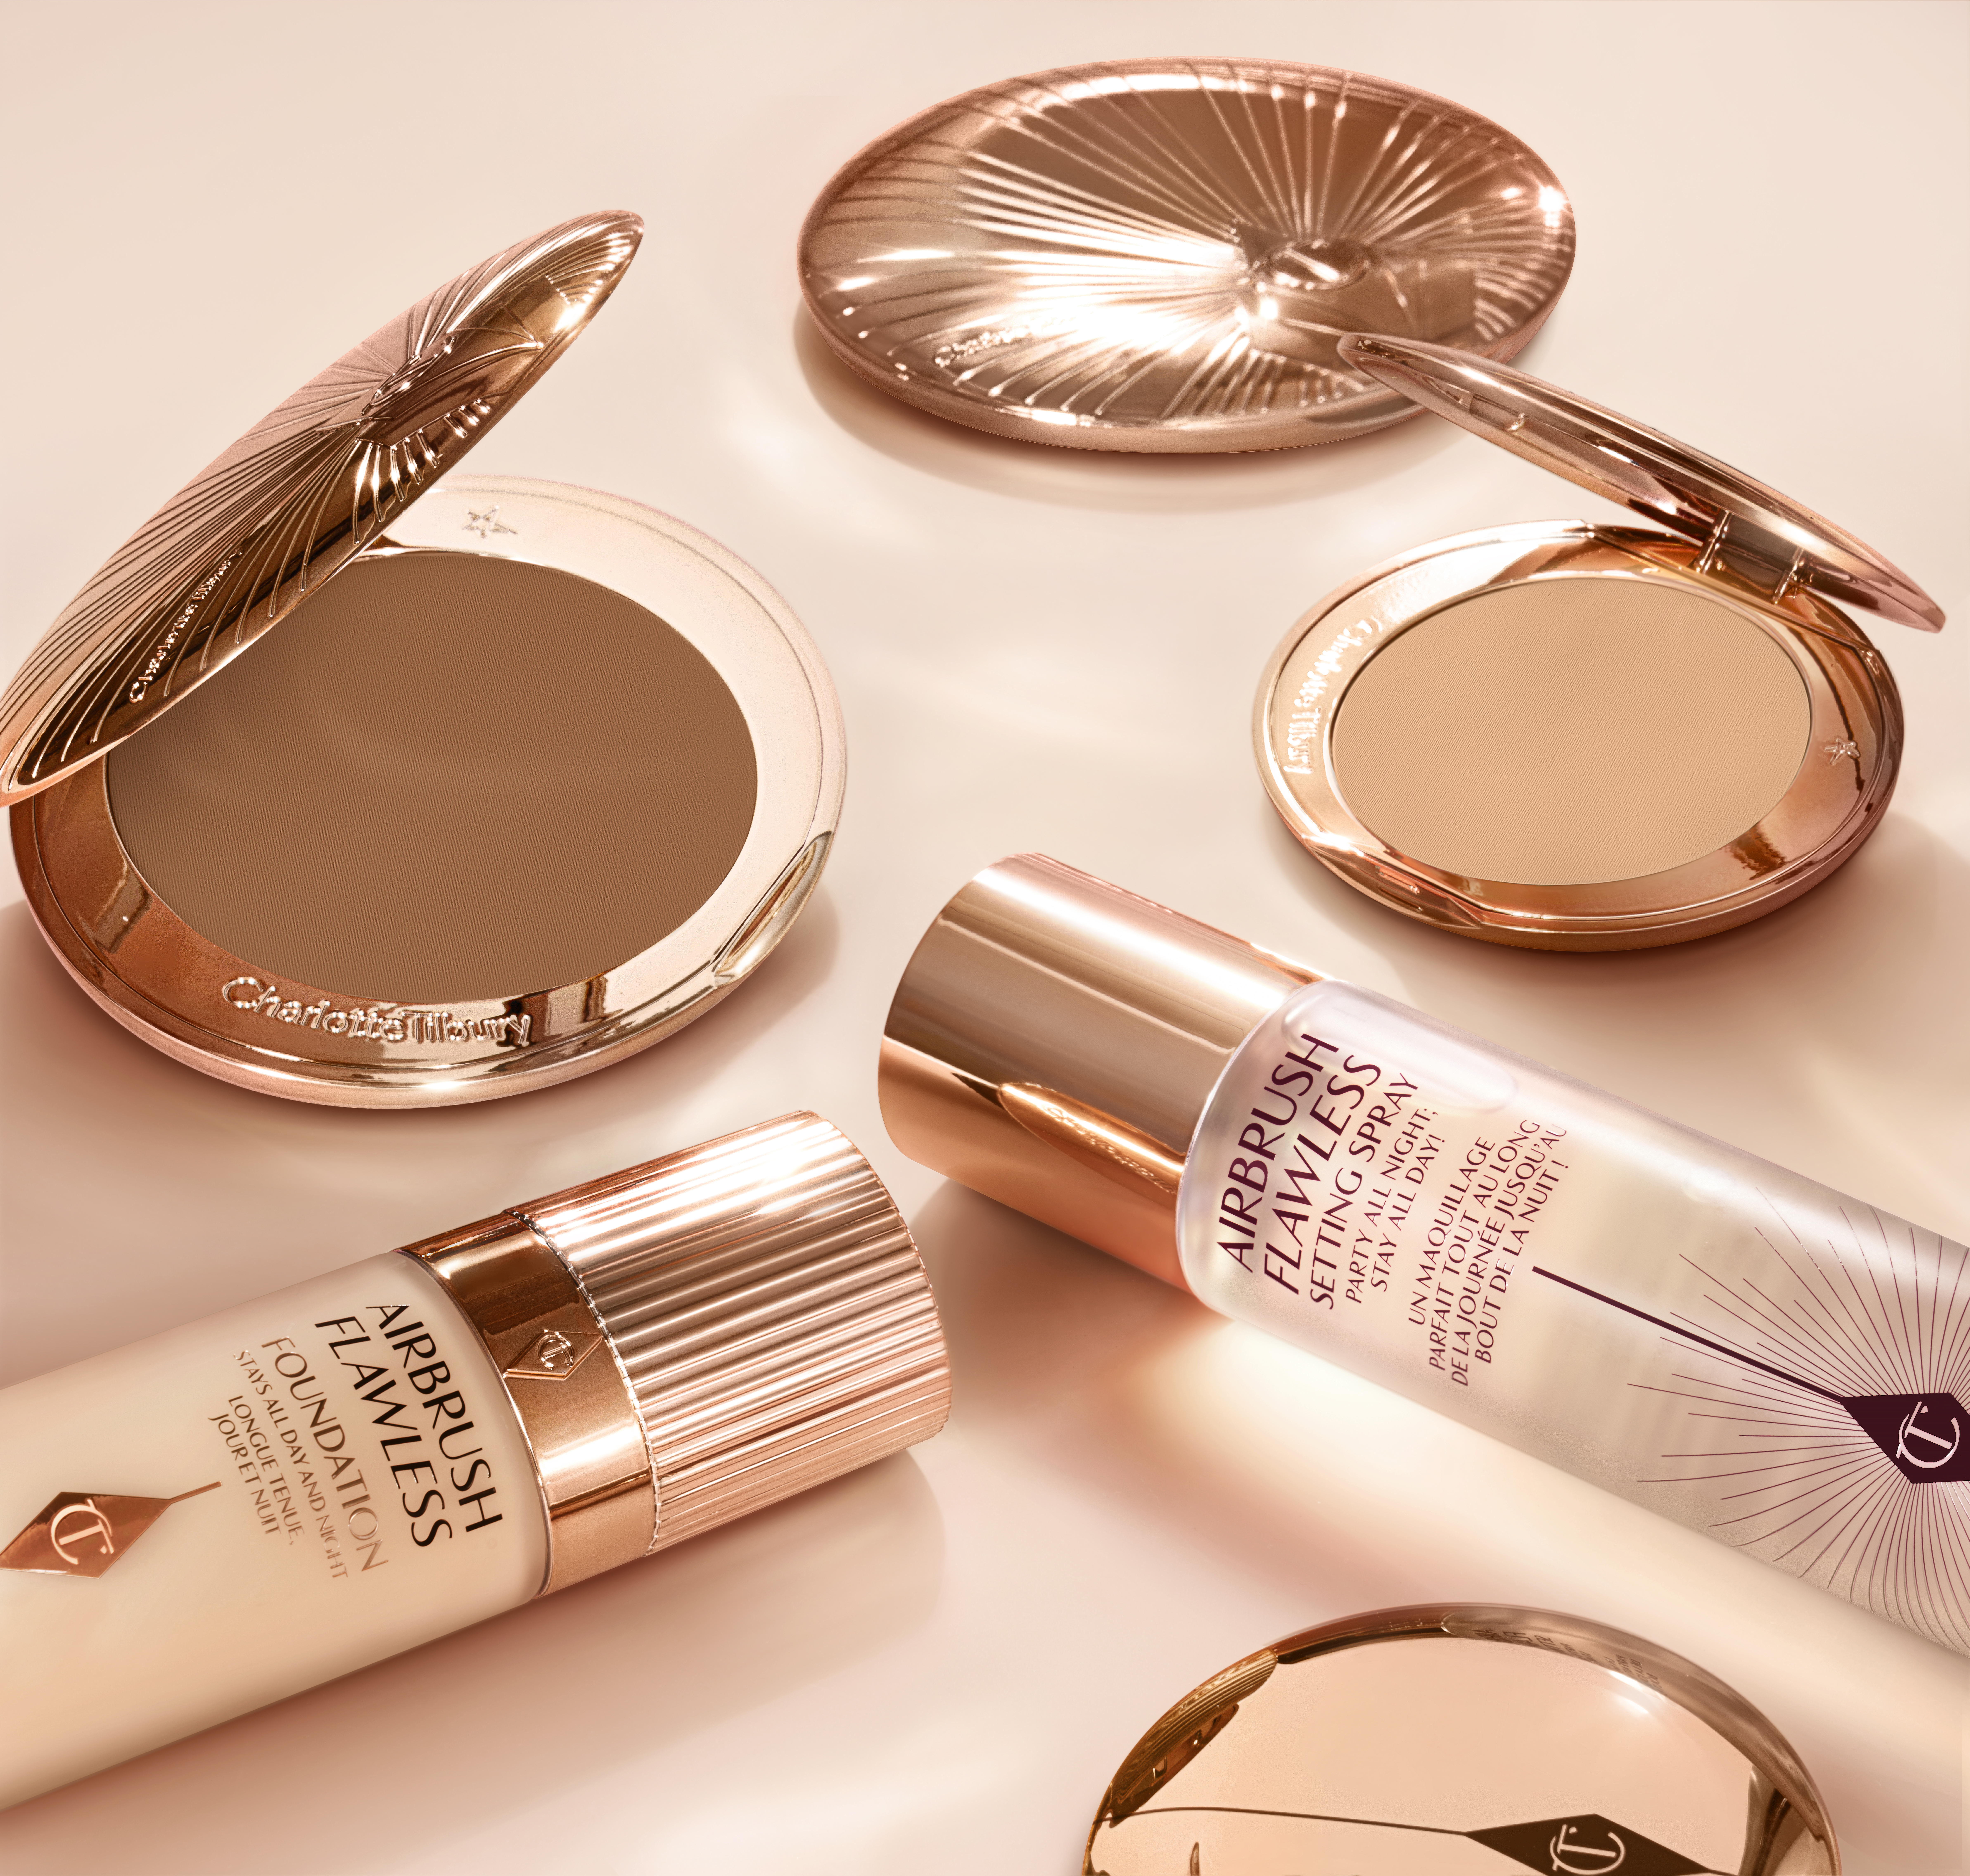 An open bronzer compact, open pressed powder compact, and foundation in a frosted glass bottle, setting spray, along with closed bronzer and pressed powder compacts, all placed on a champagne-coloured surface.